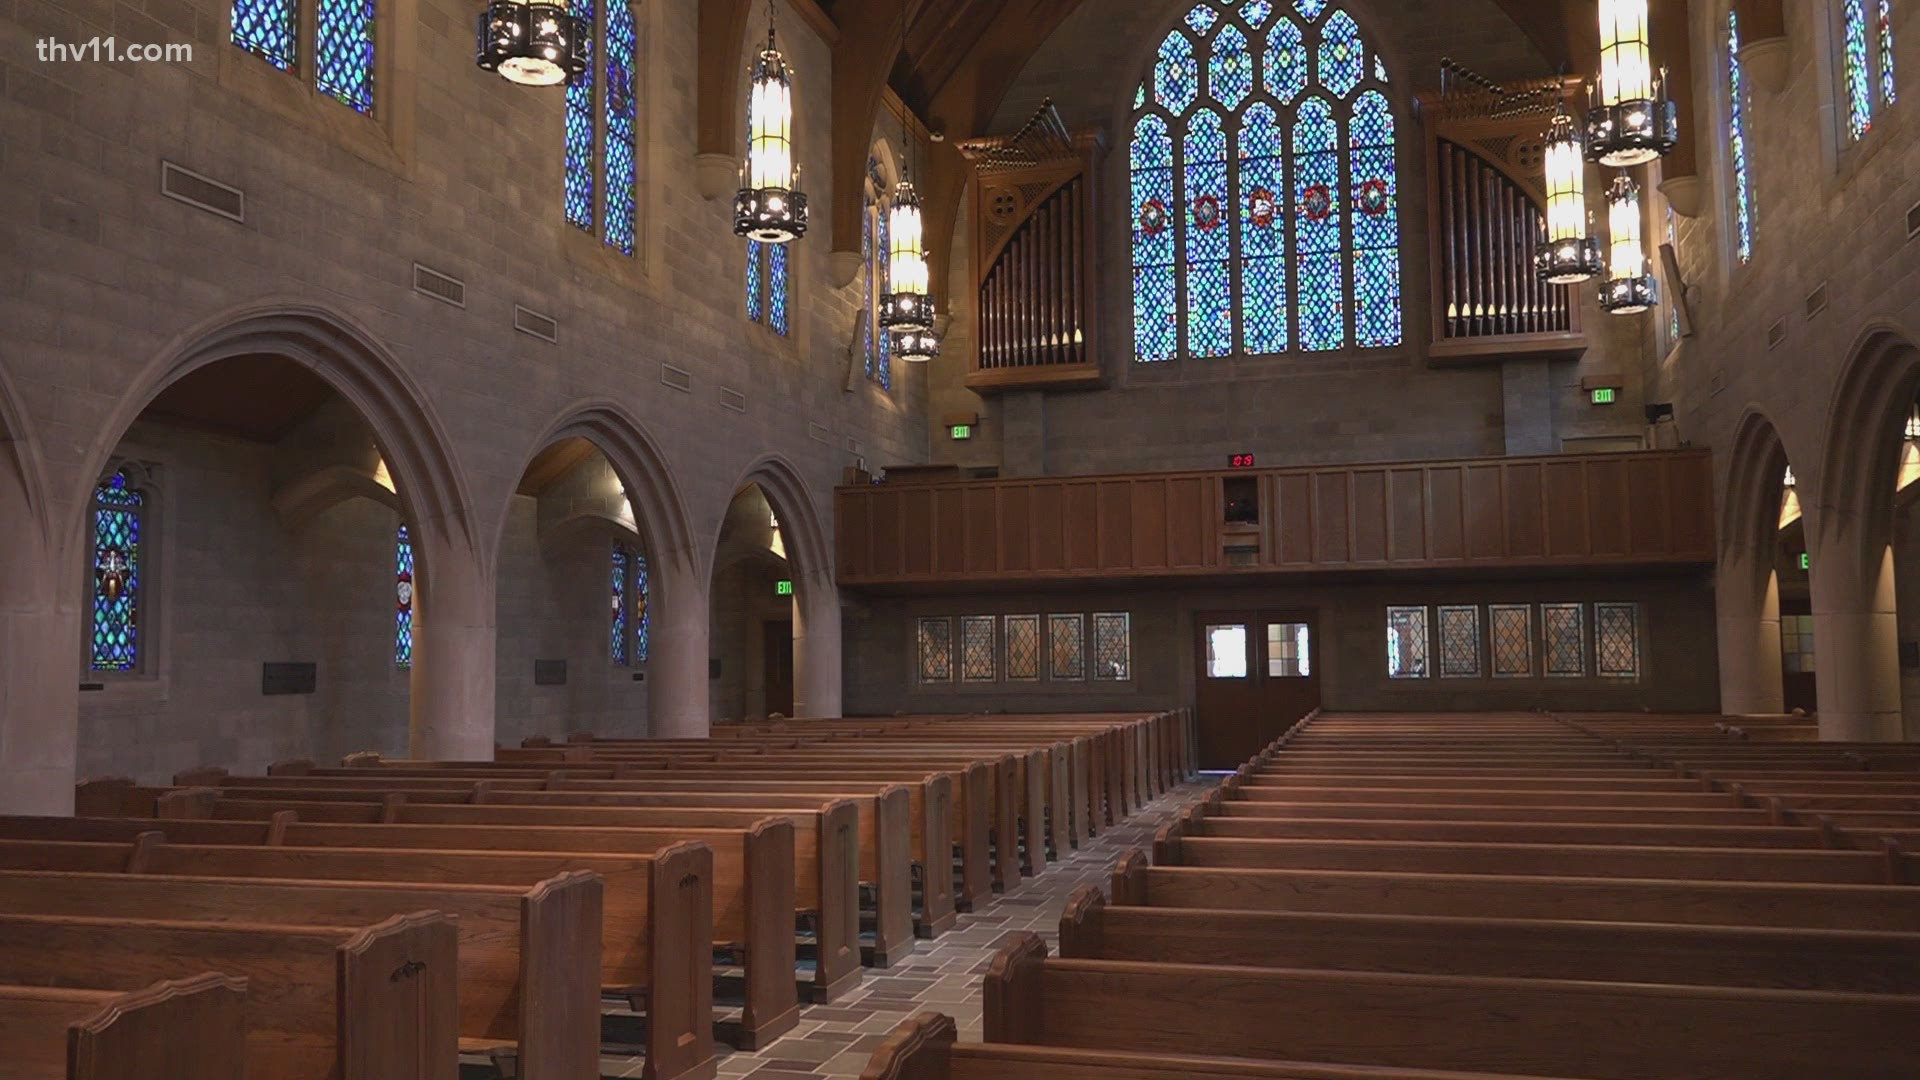 Pastors at Pulaski Heights United Methodist Church in Little Rock say the past year has definitely been a struggle, but things are getting better.